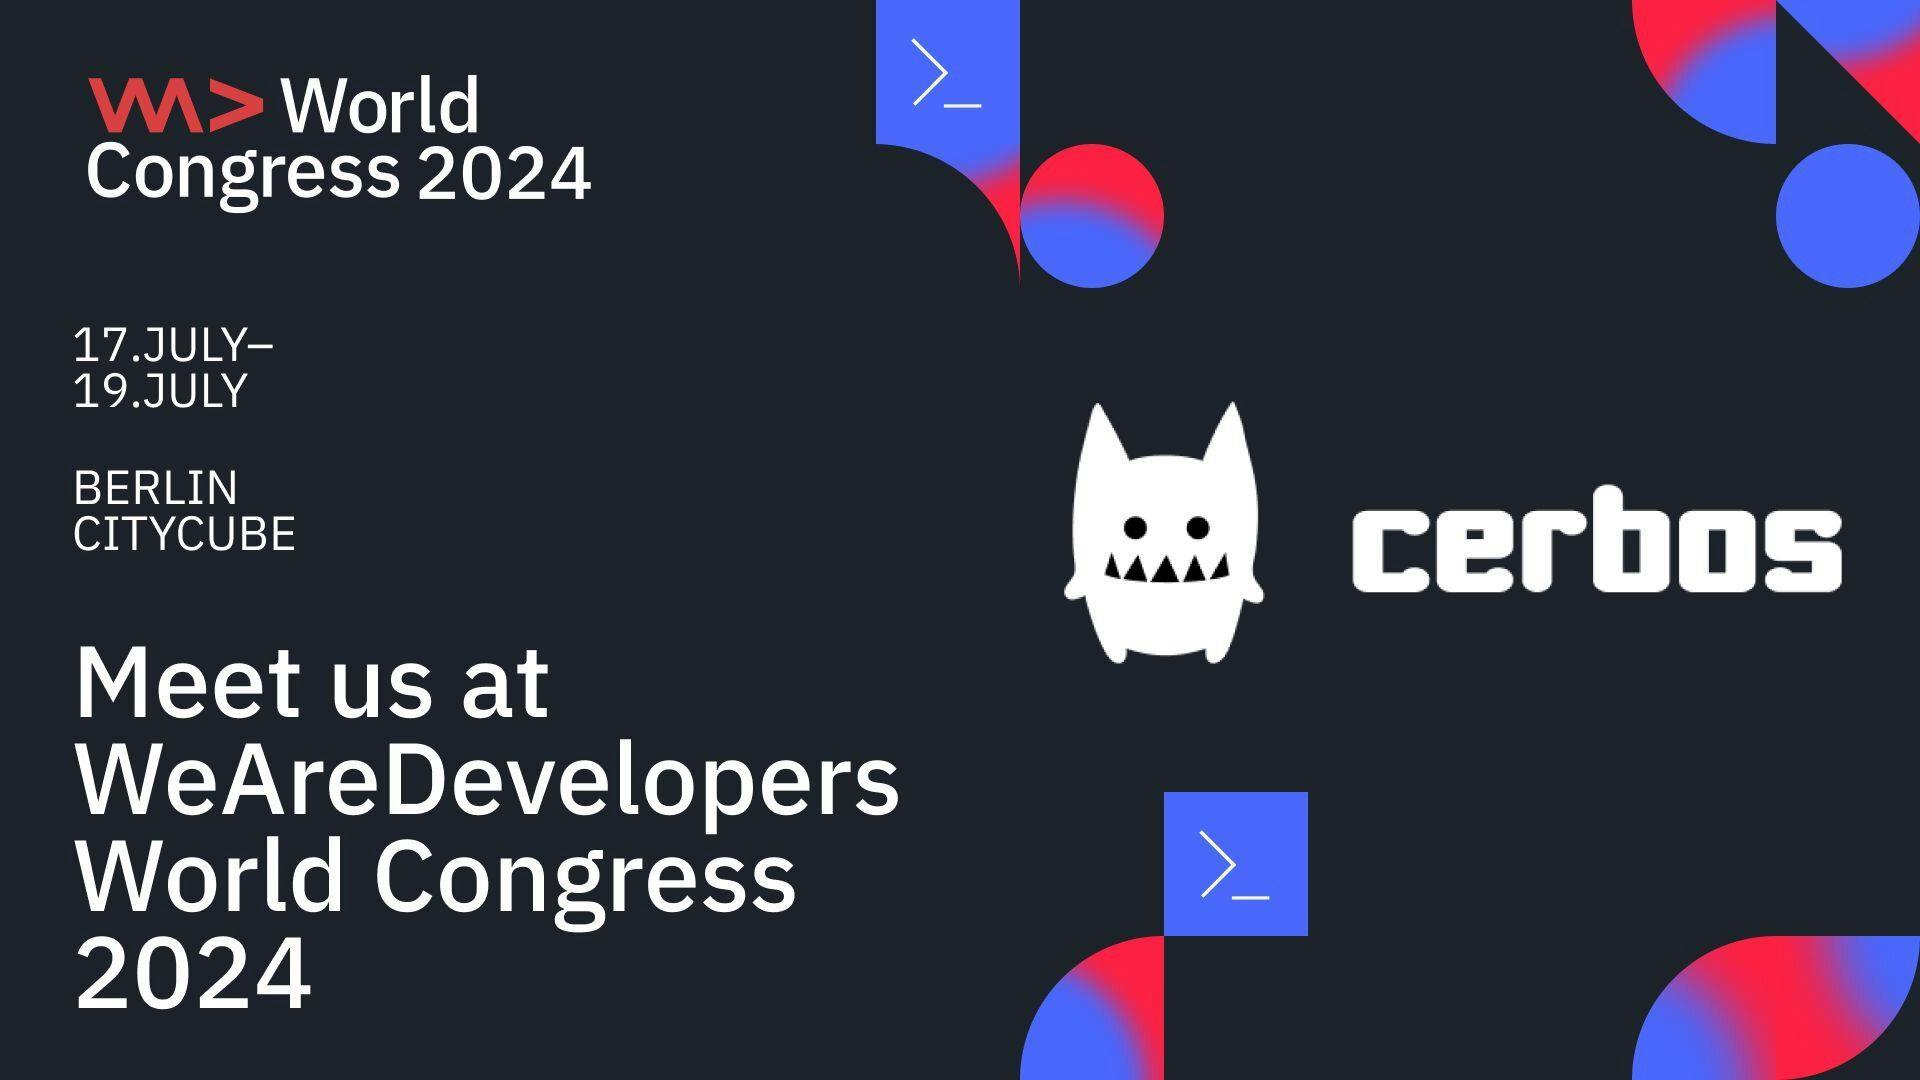 We are Developers World Congress 2024